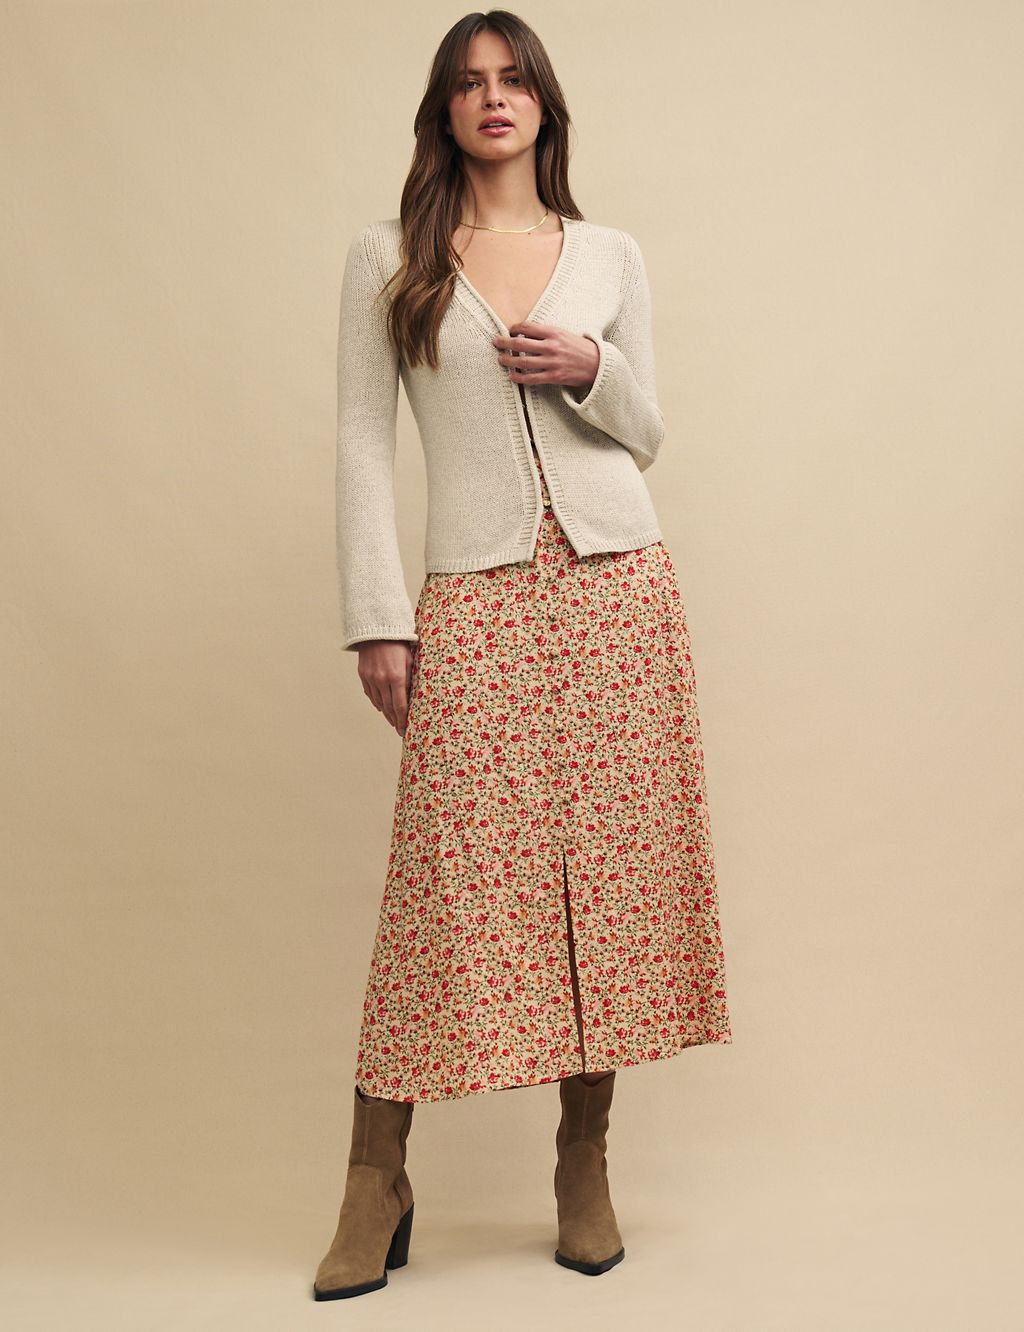 Floral Midi A-Line Skirt 3 of 4